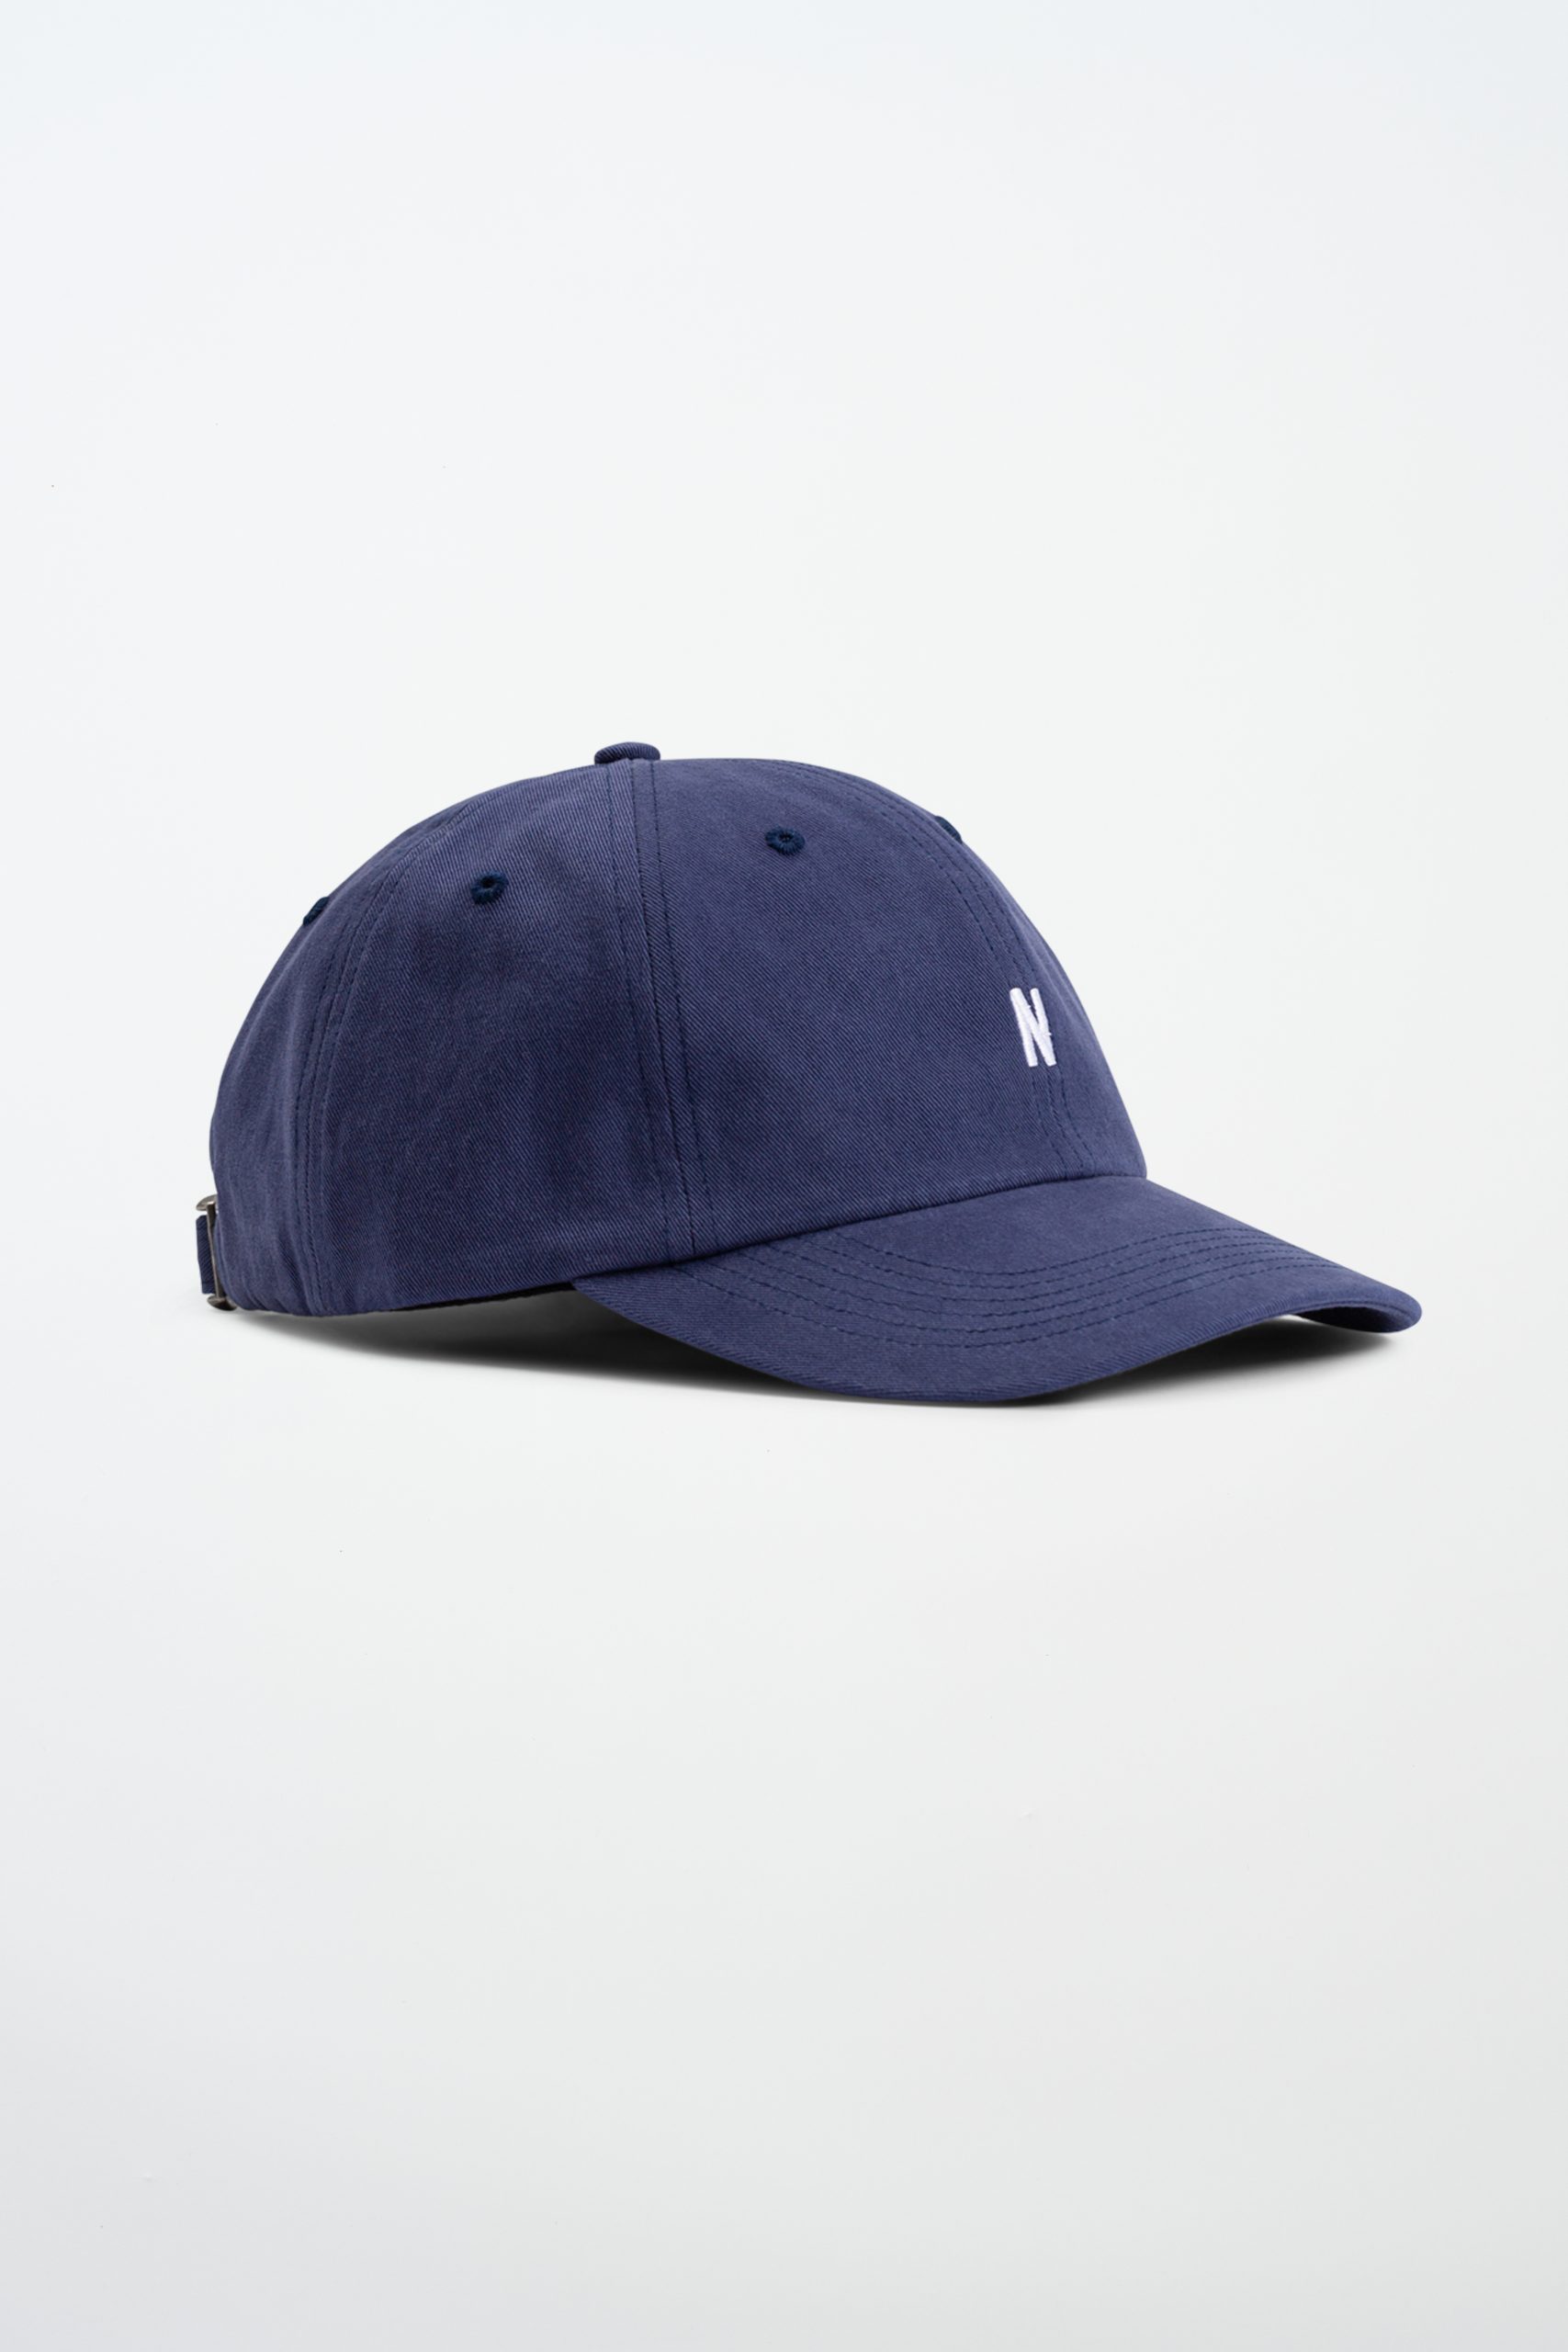 NORSE PROJECTS TWILL Sports cap Calcite blue